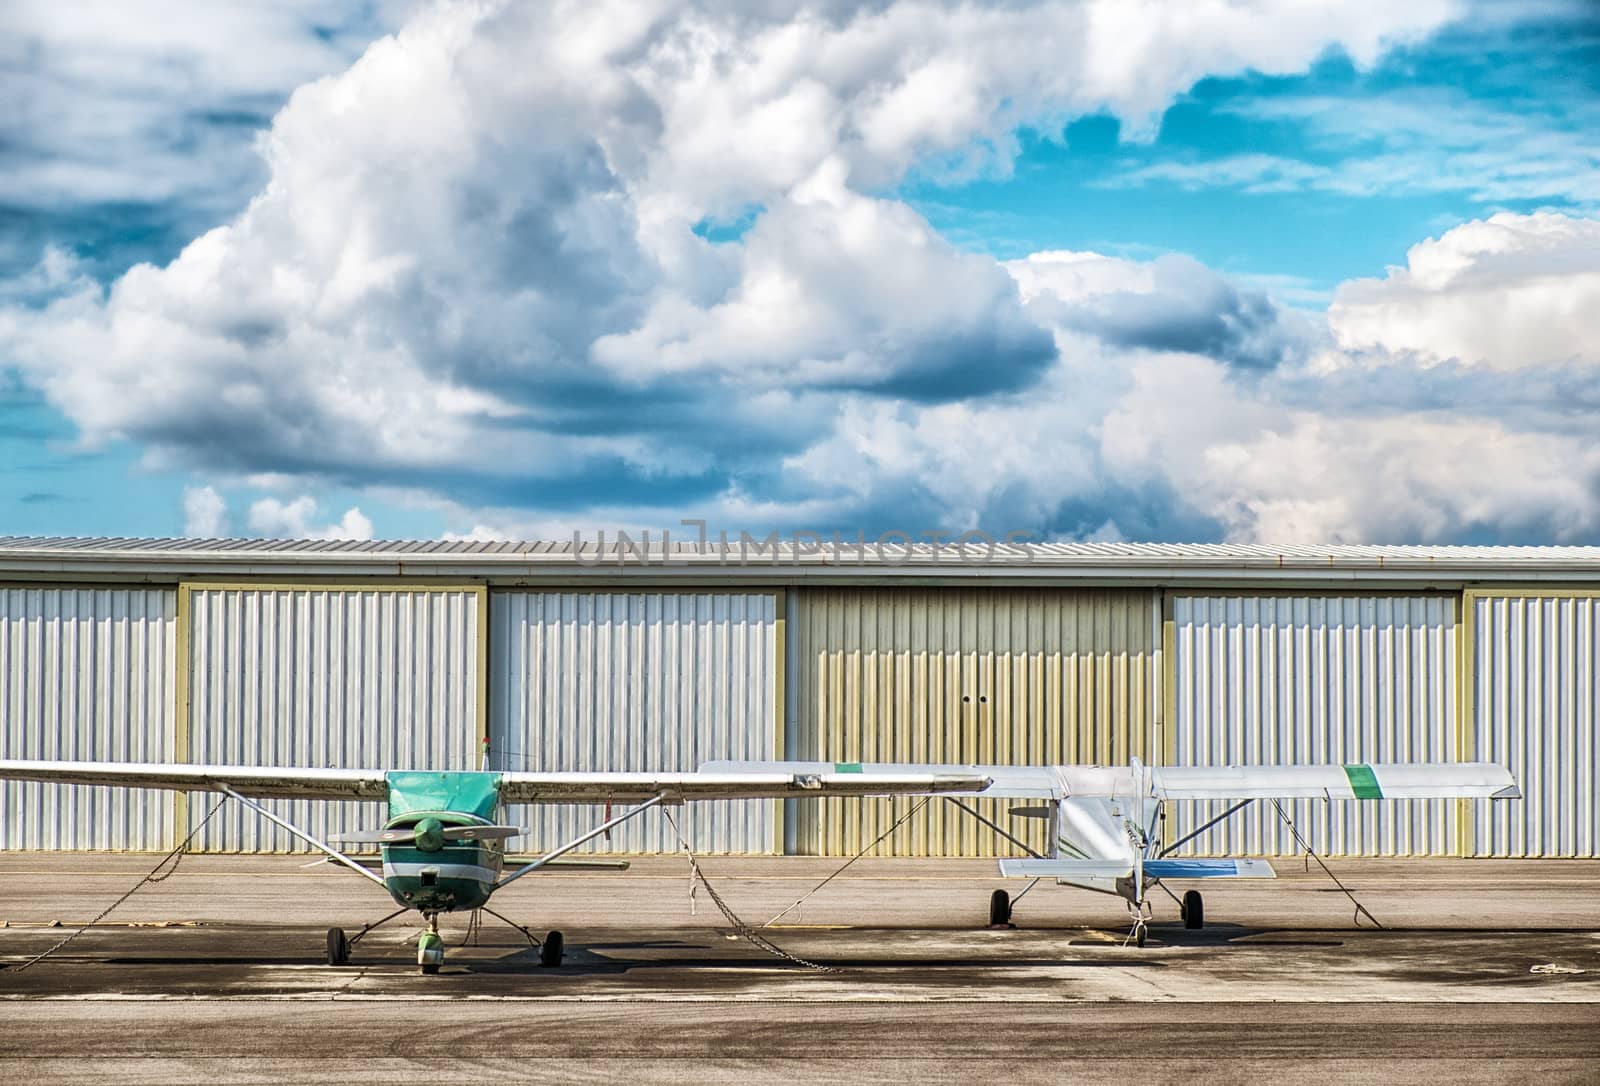 two small airplaines, clouds and hanger behind